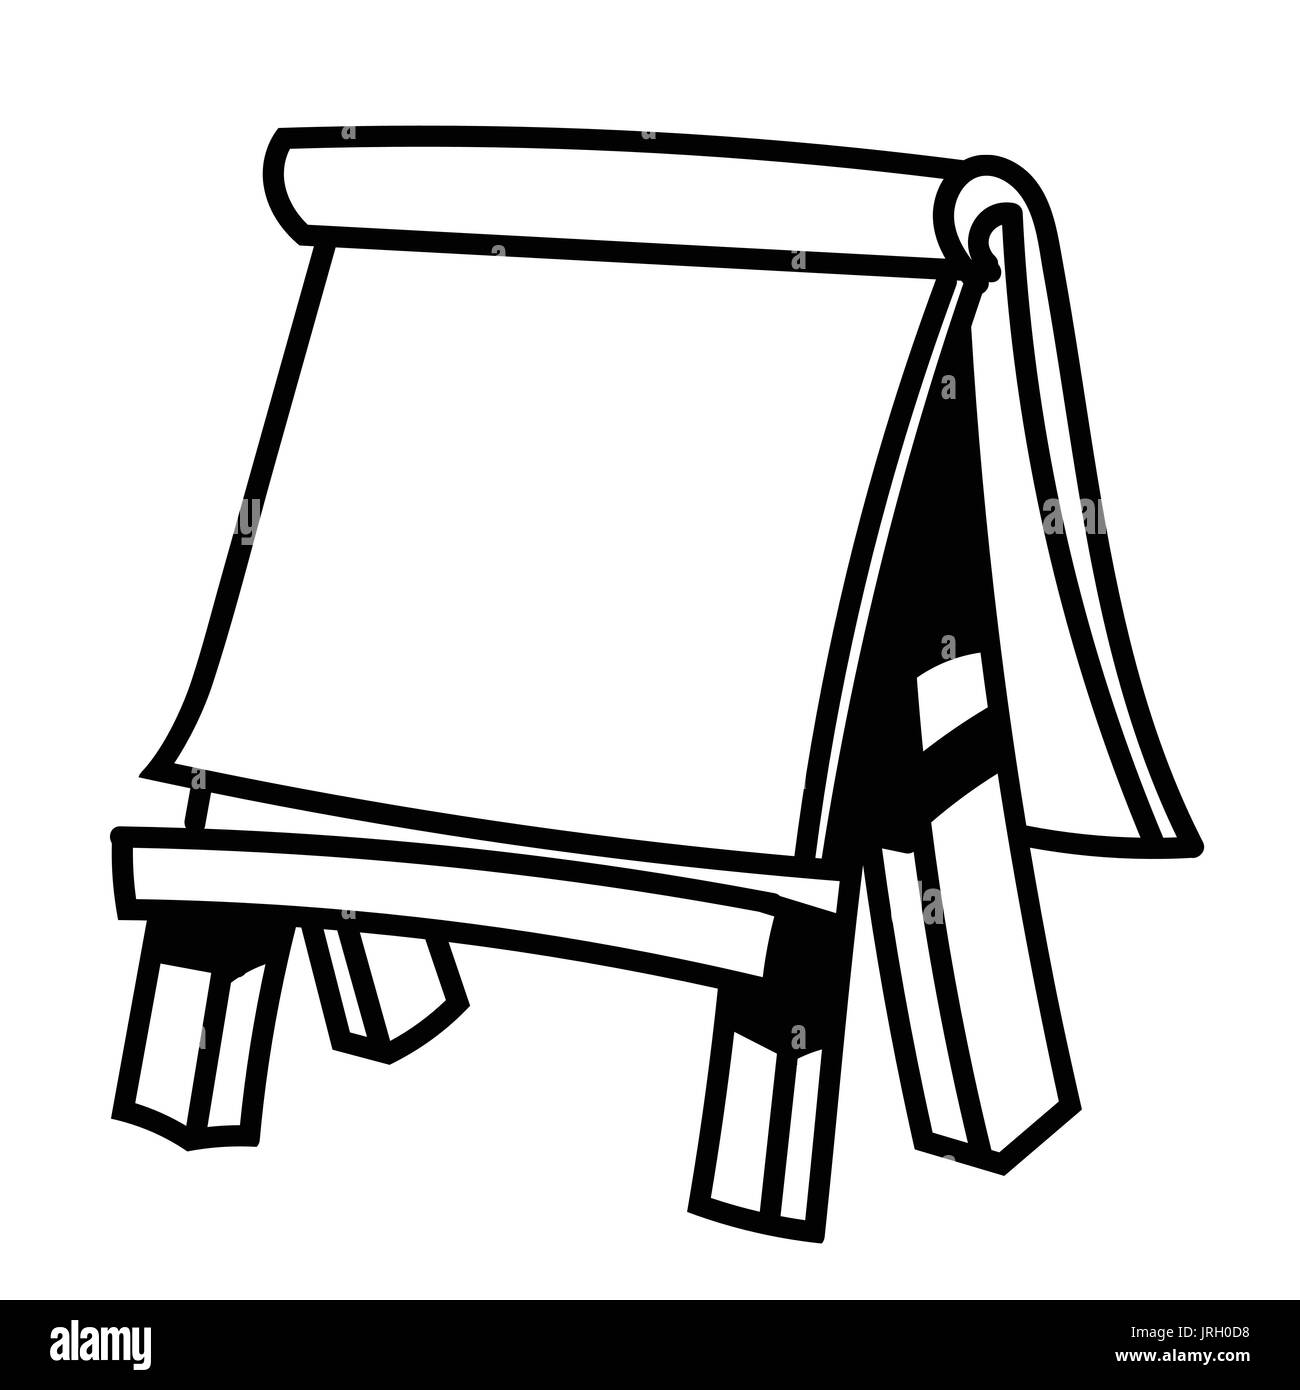 https://c8.alamy.com/comp/JRH0D8/hand-drawn-sketch-of-paper-board-on-wooden-easel-black-and-white-simple-JRH0D8.jpg